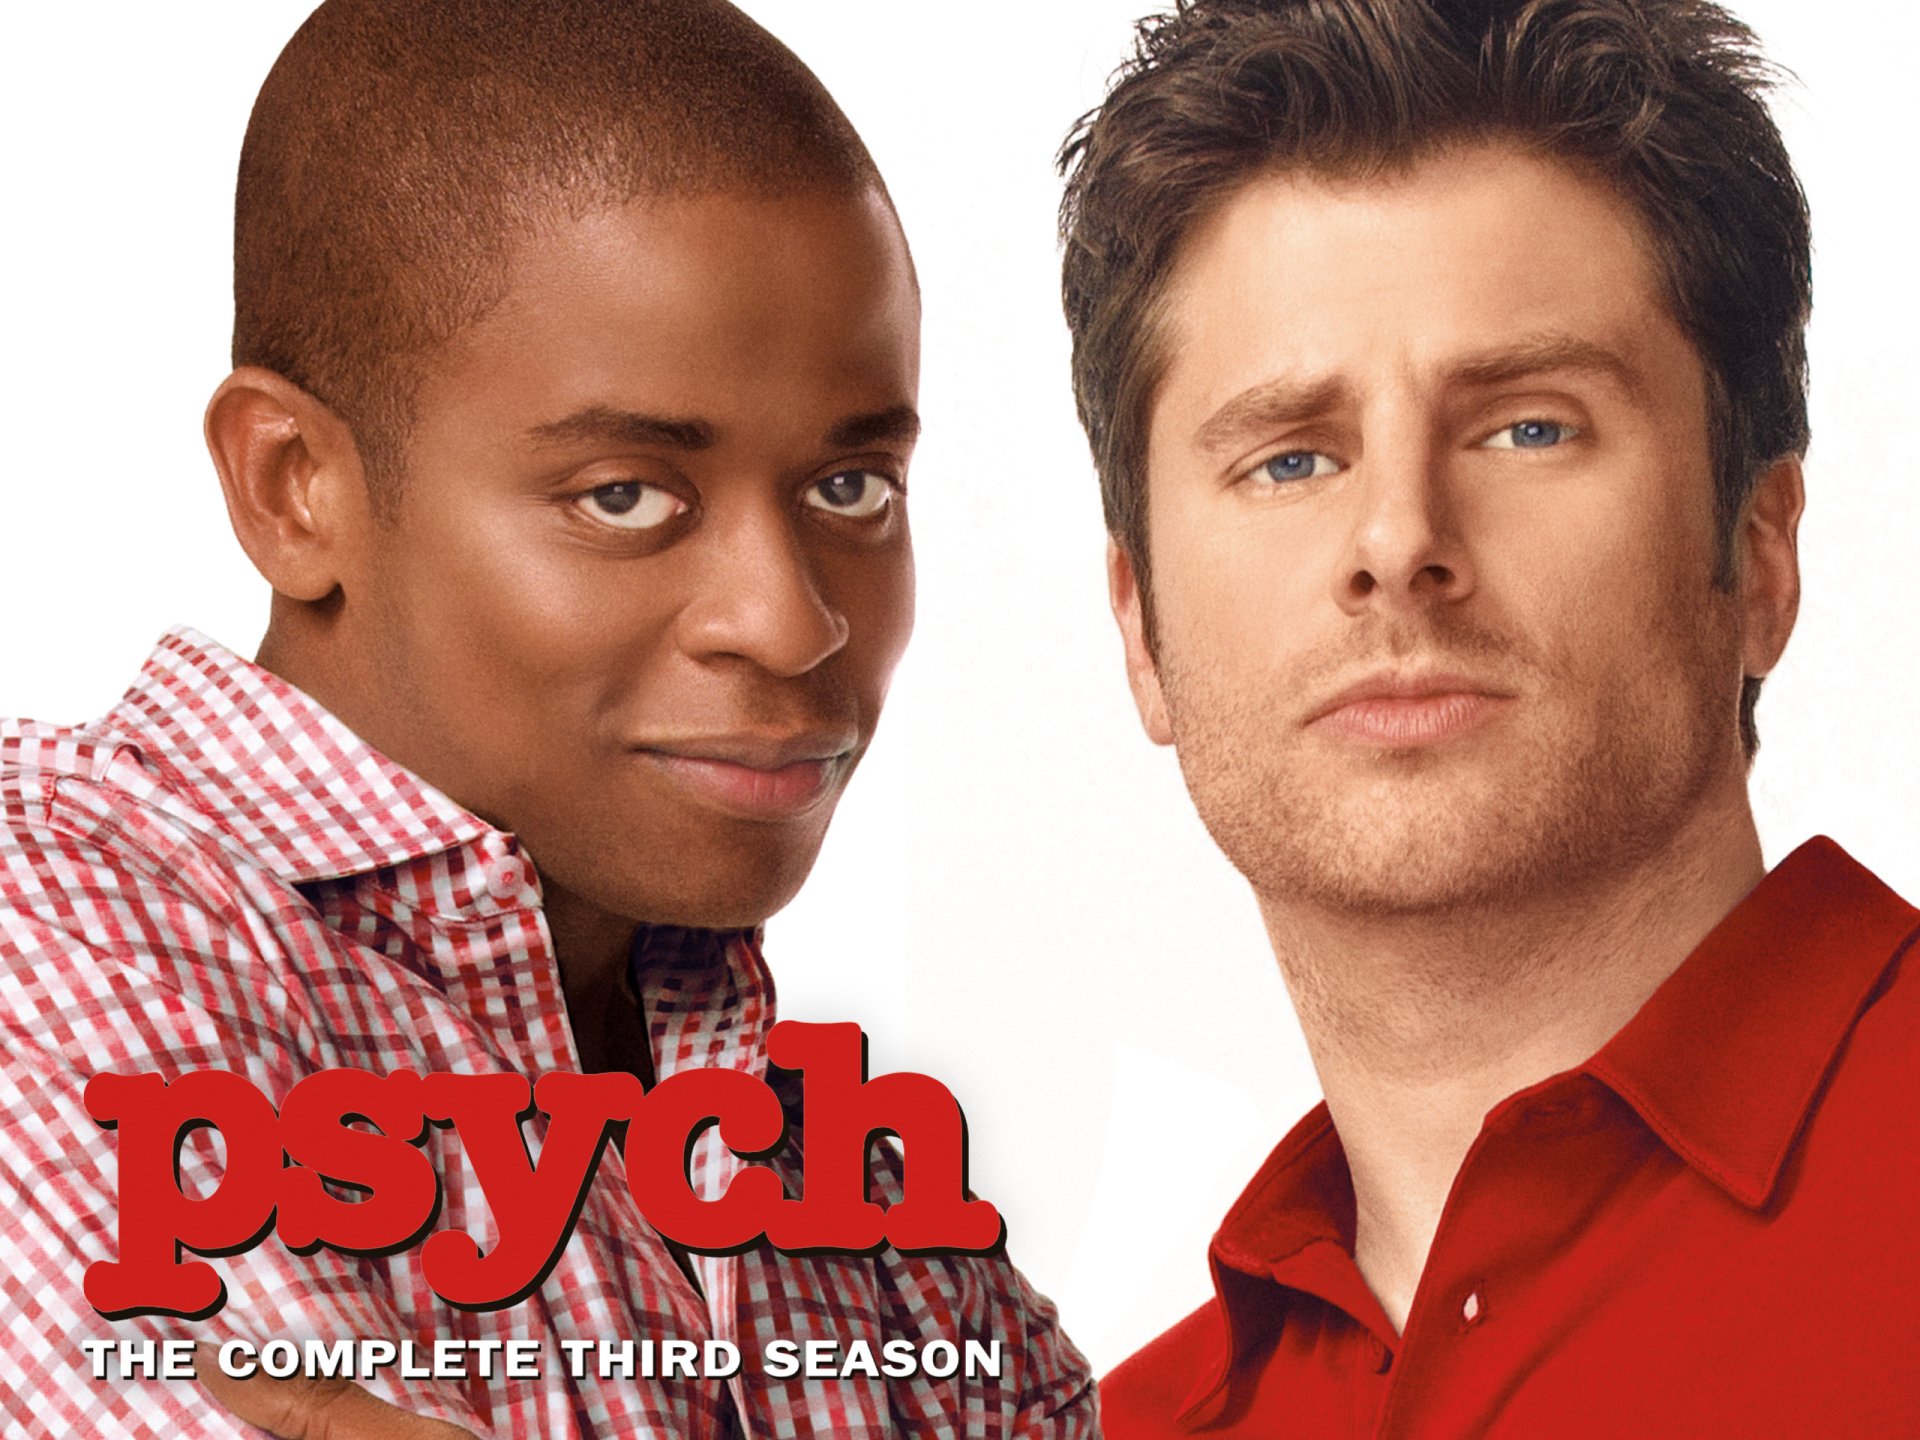 Psych HD Wallpaper: Download Now